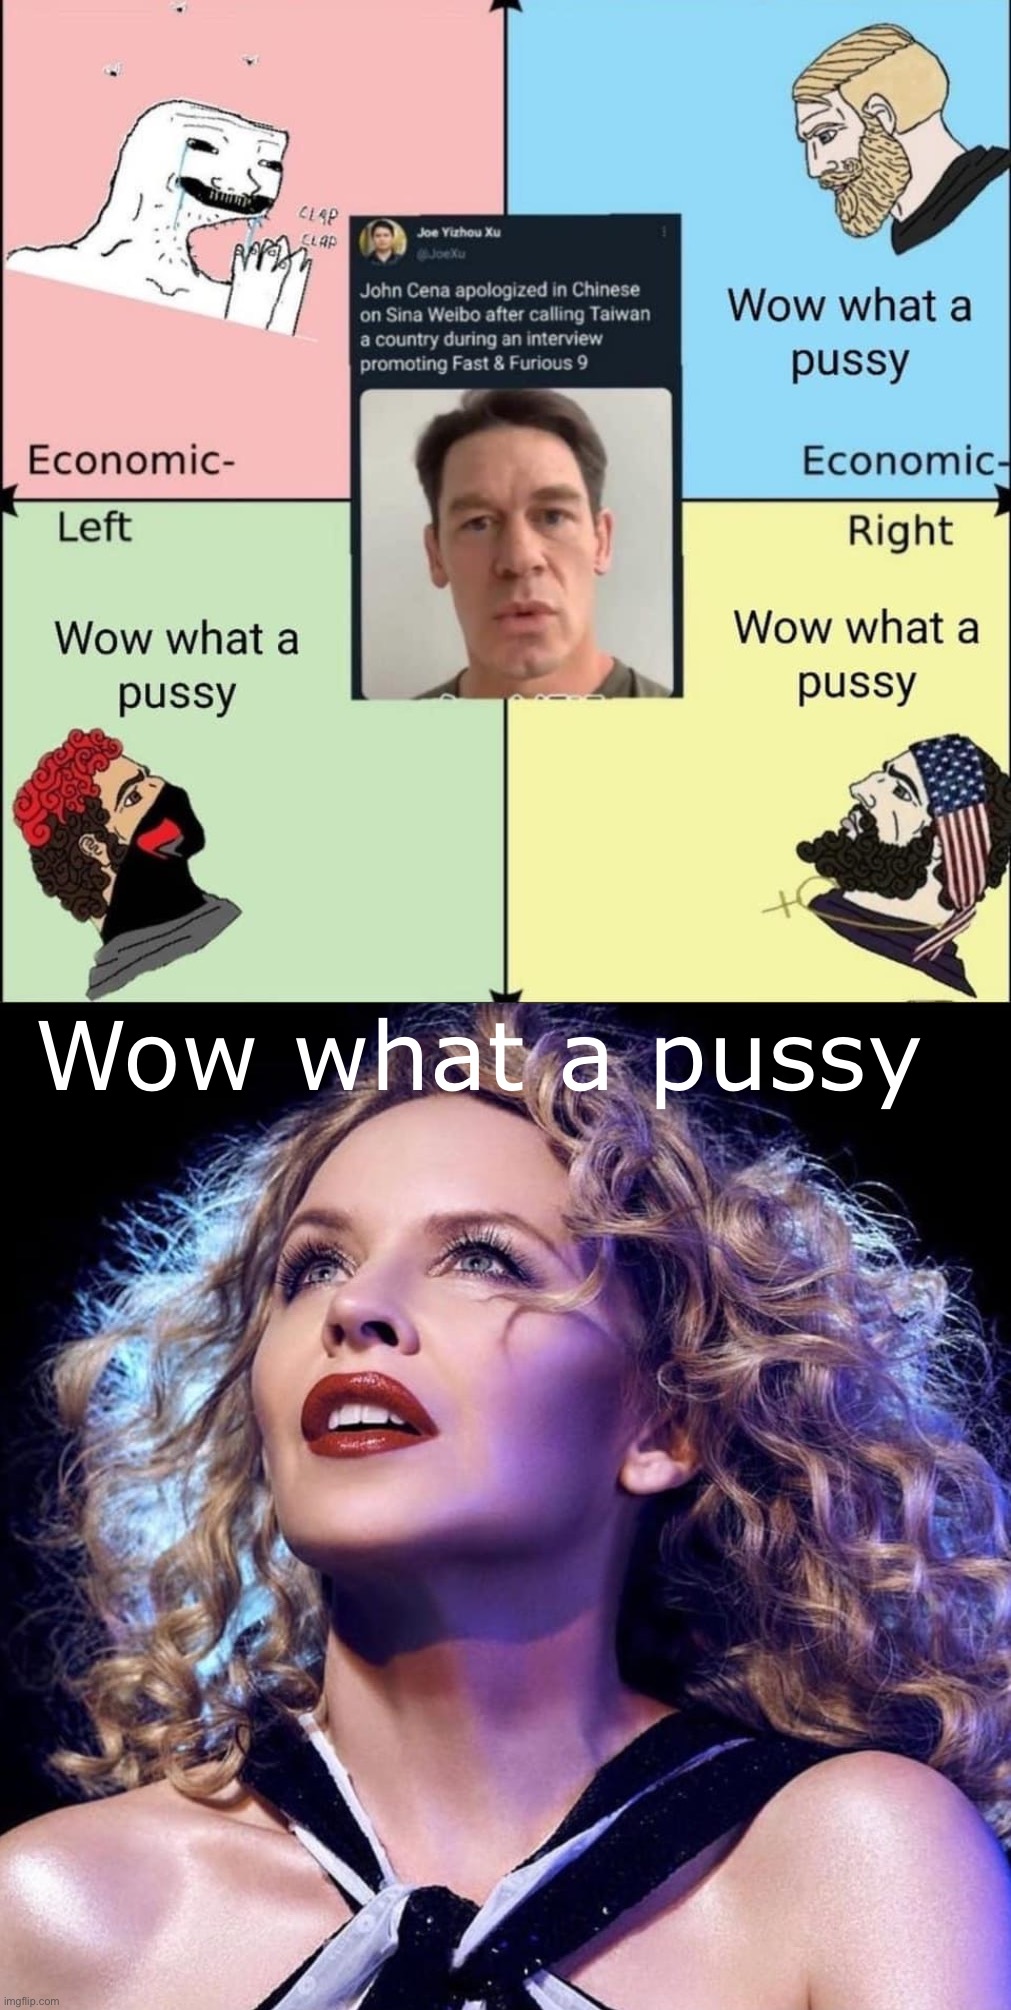 Even Kylie hated that one, John | Wow what a pussy | image tagged in john cena wow what a pussy political compass,kylie fascinated,taiwan,john cena,pussy,china | made w/ Imgflip meme maker